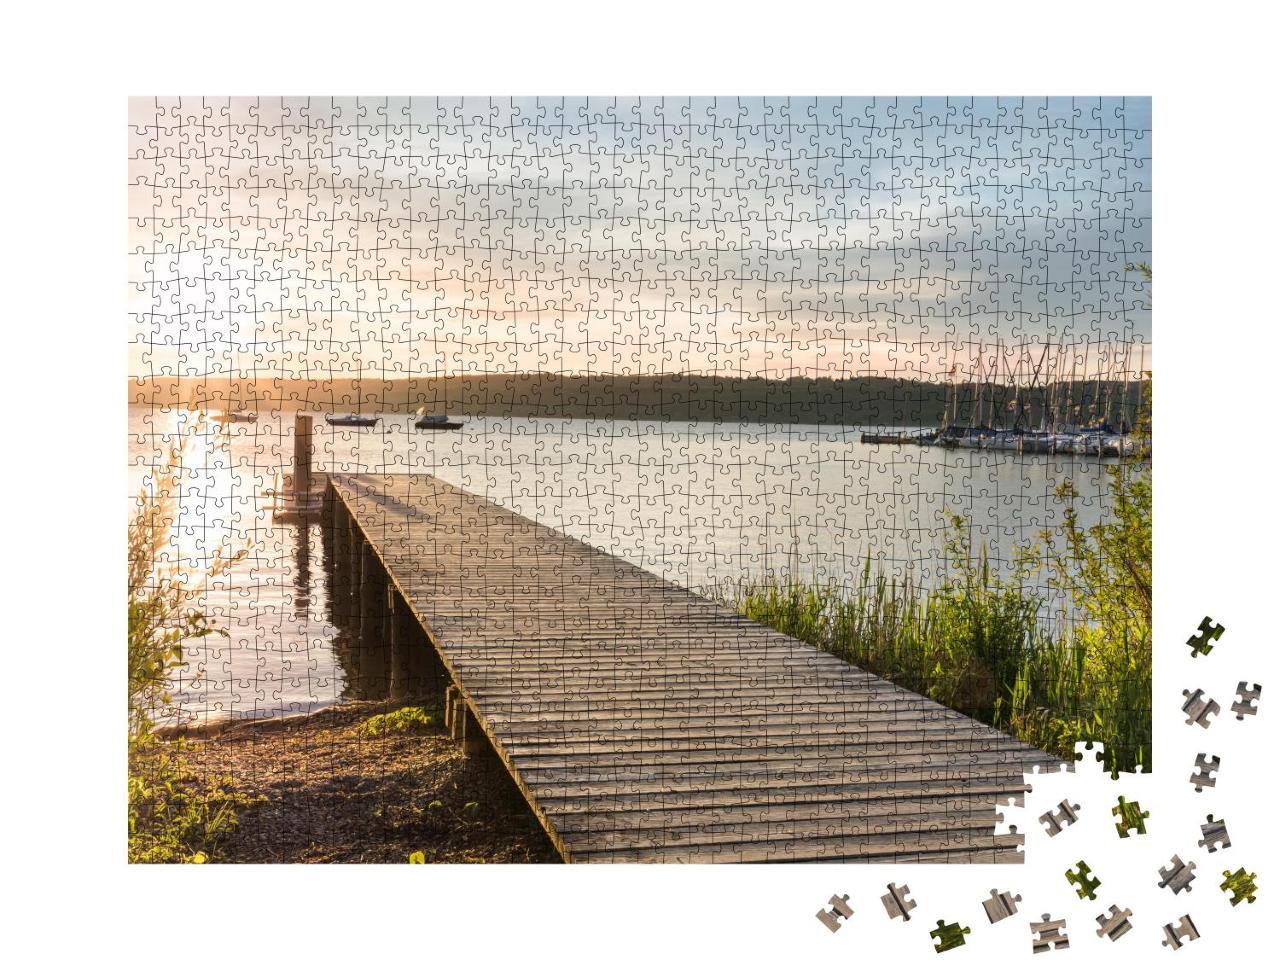 Puzzle 1000 Teile „Sonnenaufgang in Oberbayern am Ammersee“